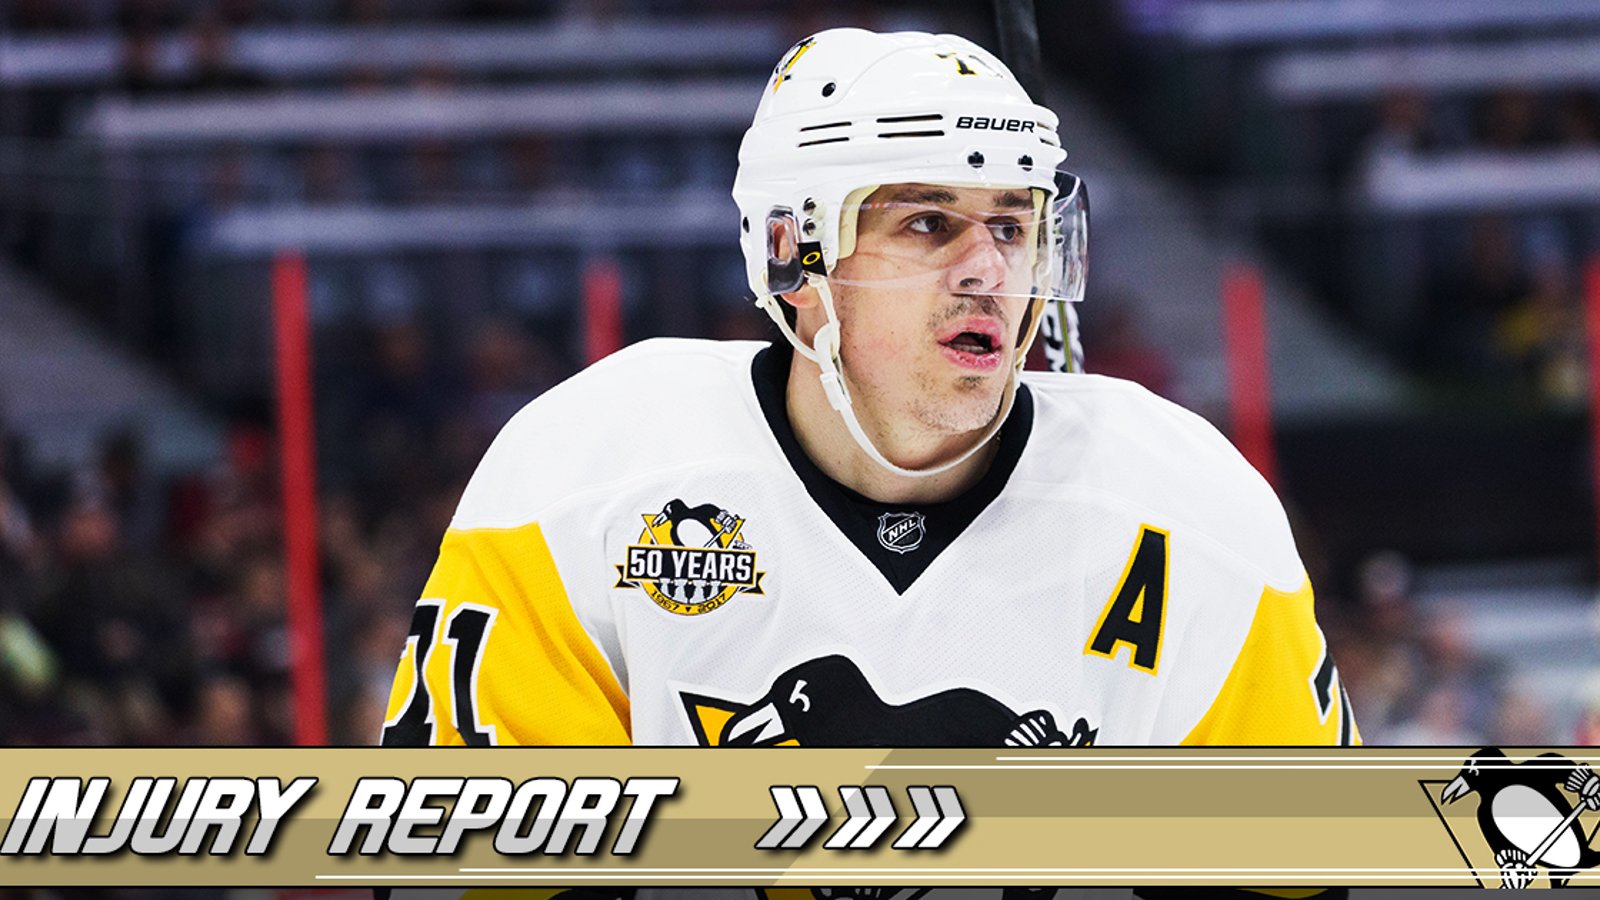 Injury Report: Update on the injury of Malkin, Letang and more.